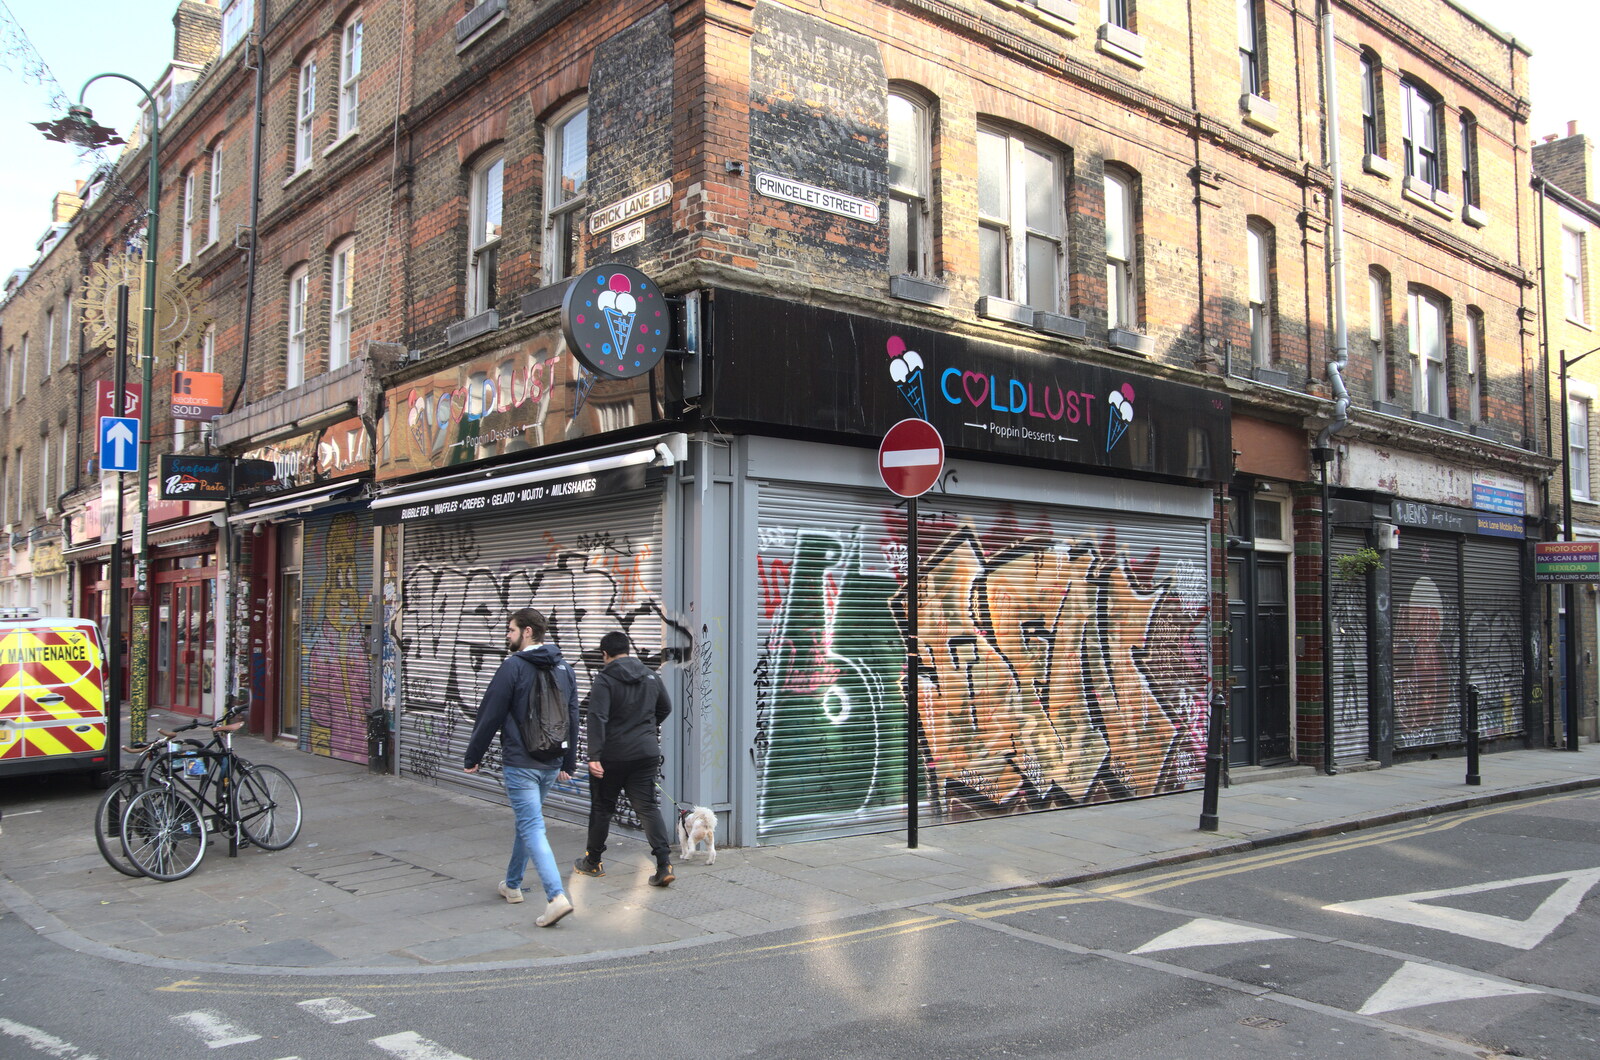 A Walk Around the South Bank, London - 25th March 2022: More graffiti on shop shutters